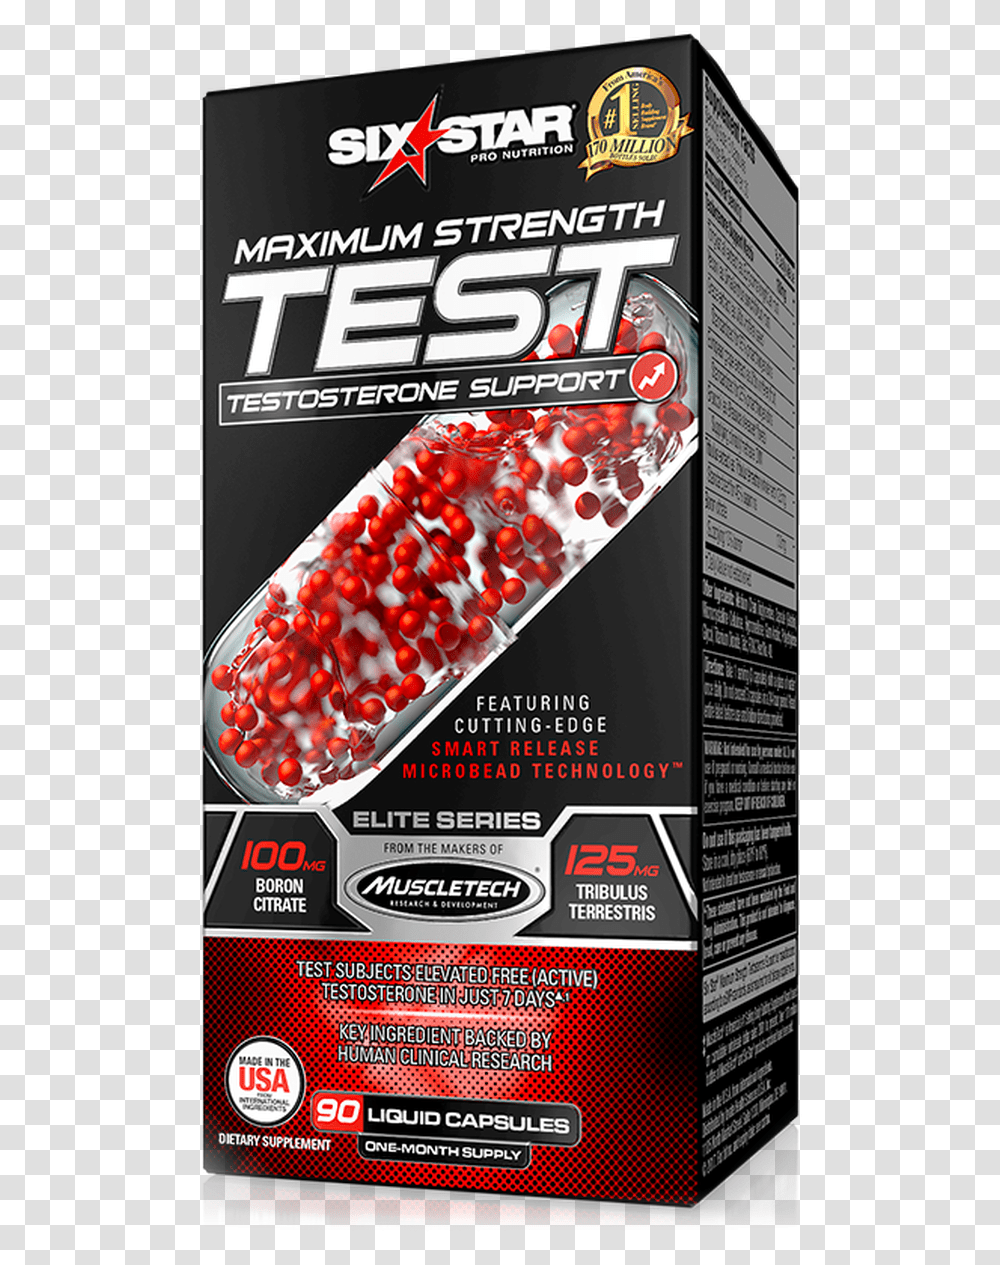 Maximum Strength Testosterone Support Six Star Maximum Strength Test Testosterone Support, Poster, Advertisement, Flyer, Paper Transparent Png